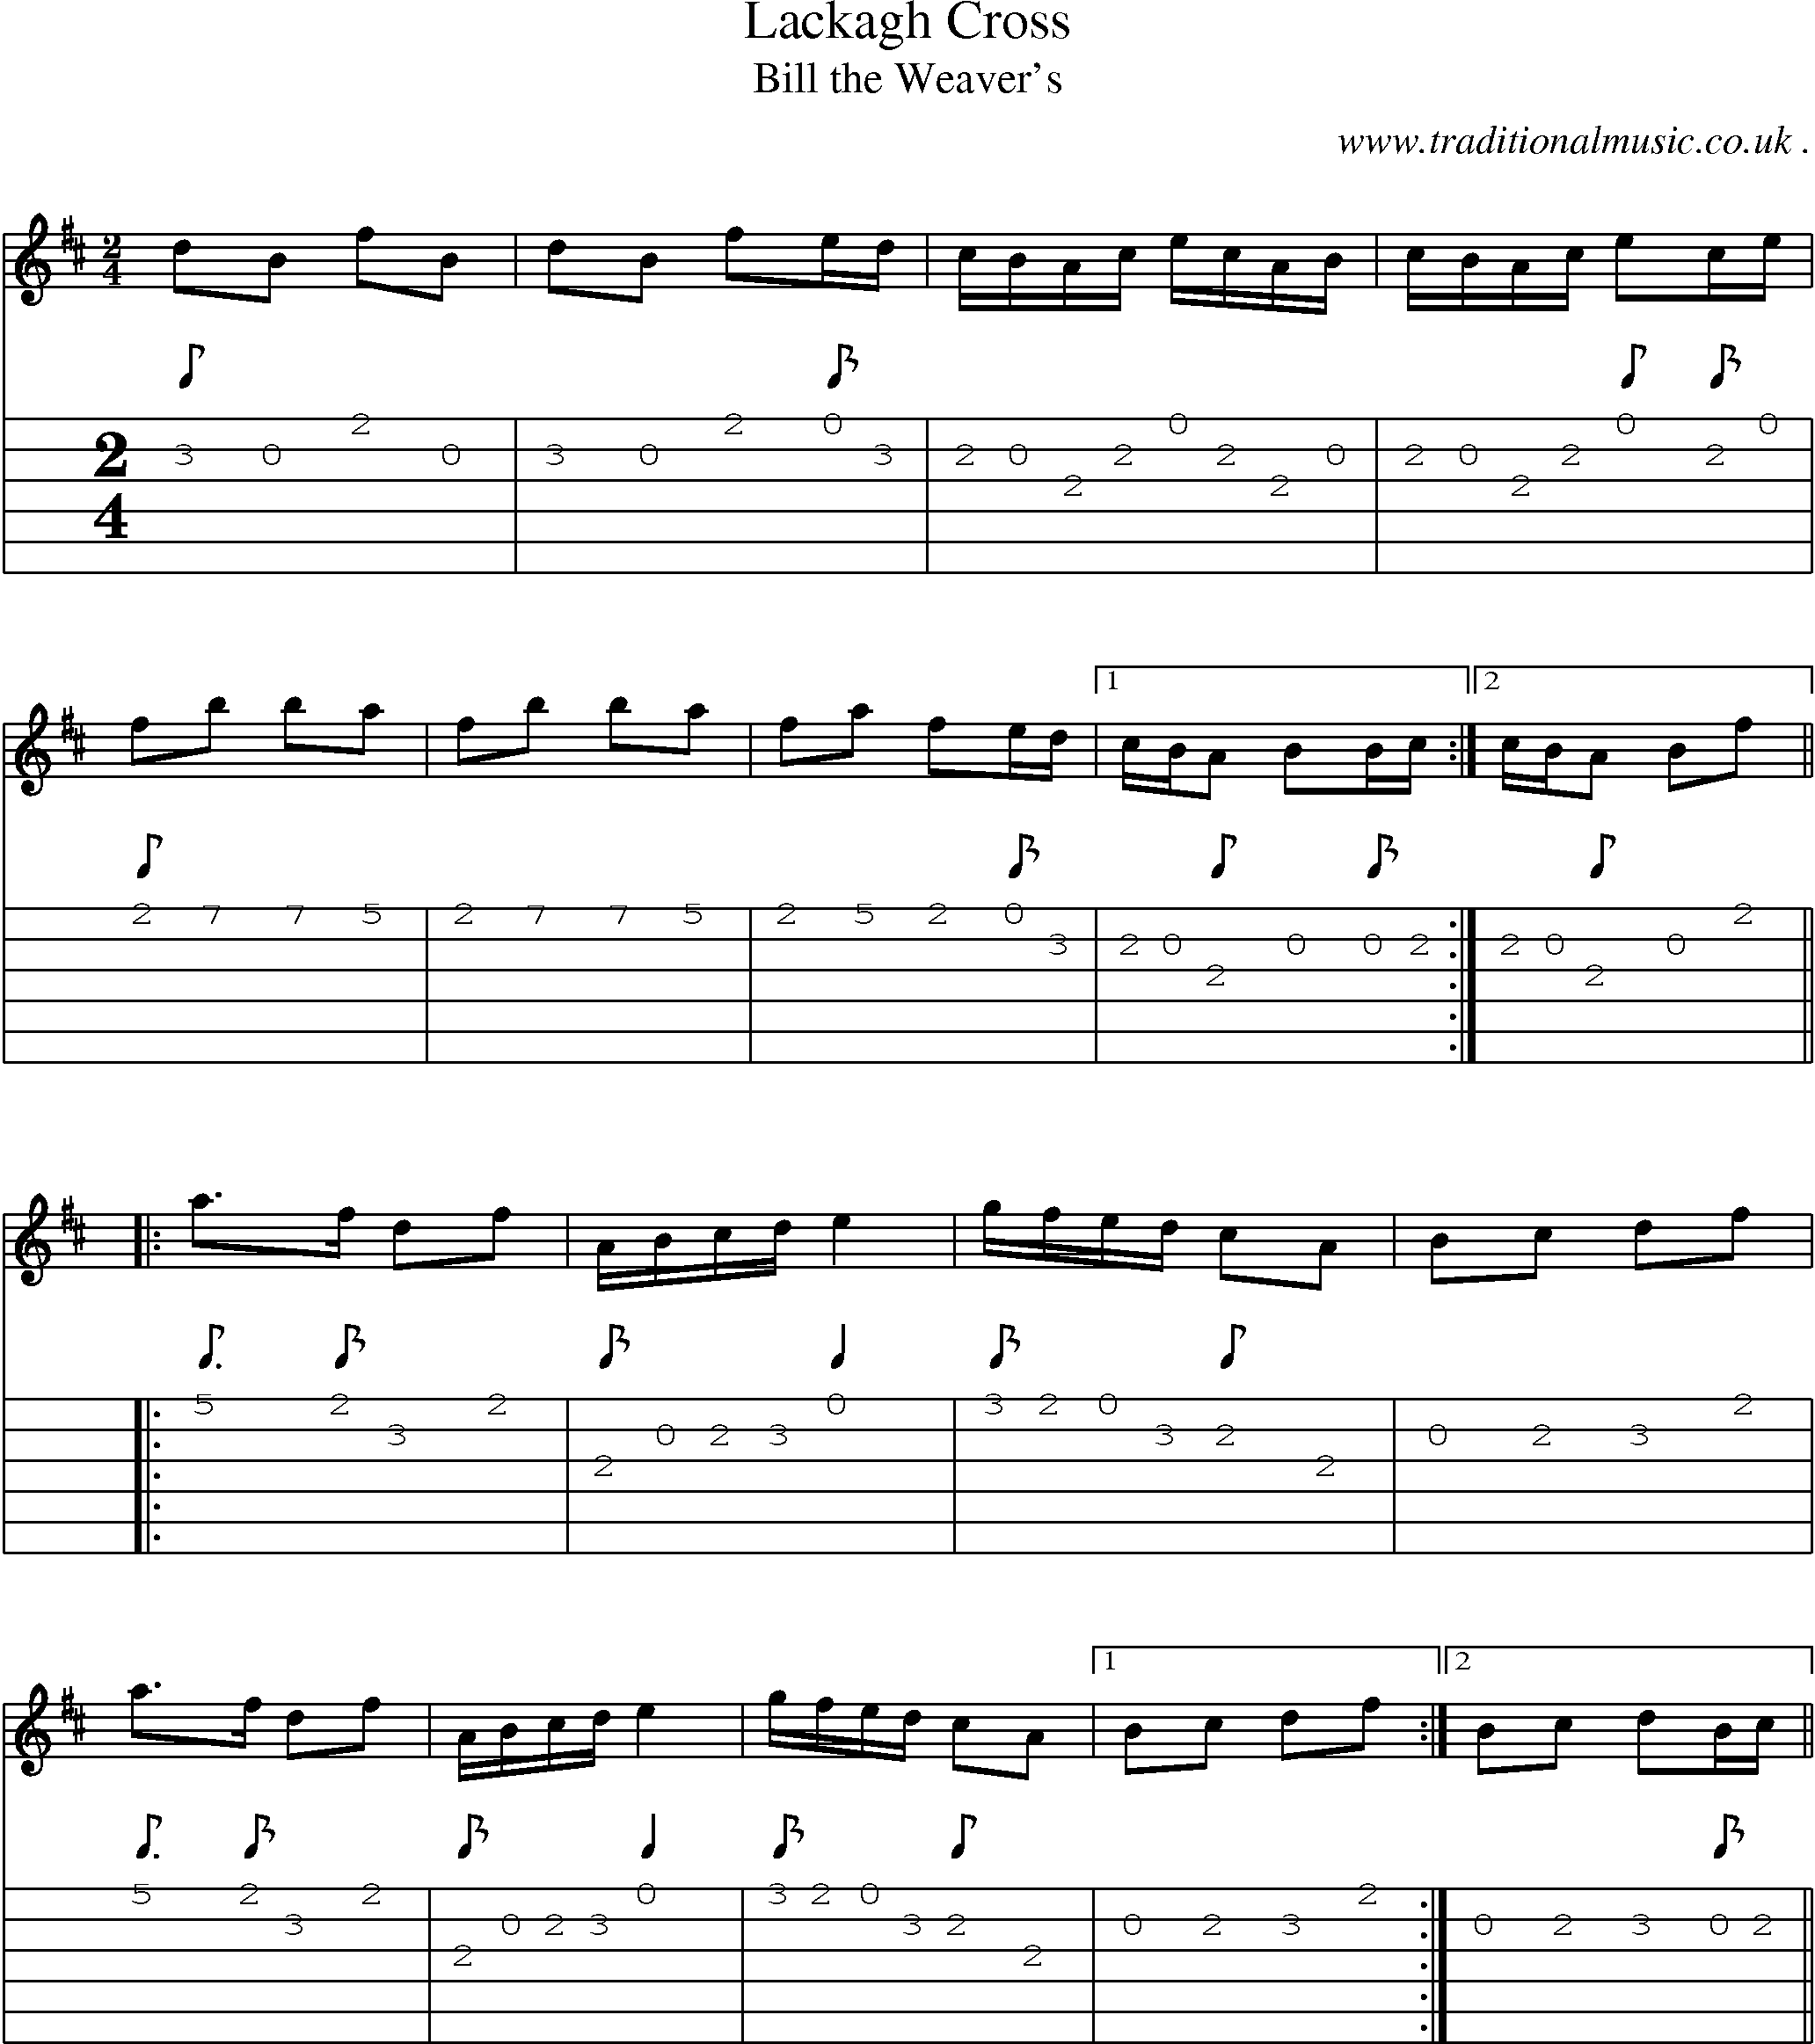 Sheet-Music and Guitar Tabs for Lackagh Cross